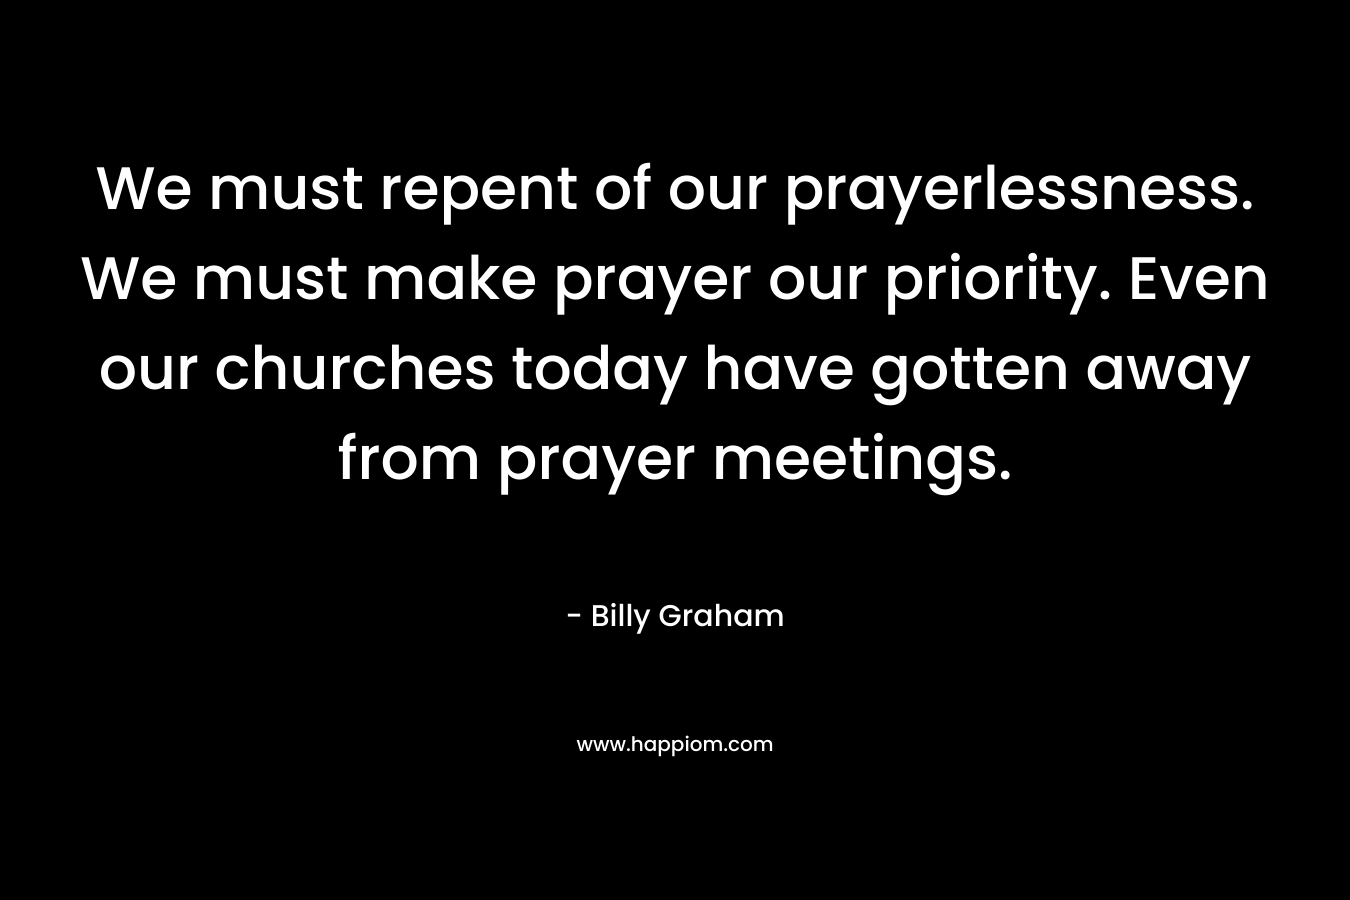 We must repent of our prayerlessness. We must make prayer our priority. Even our churches today have gotten away from prayer meetings.